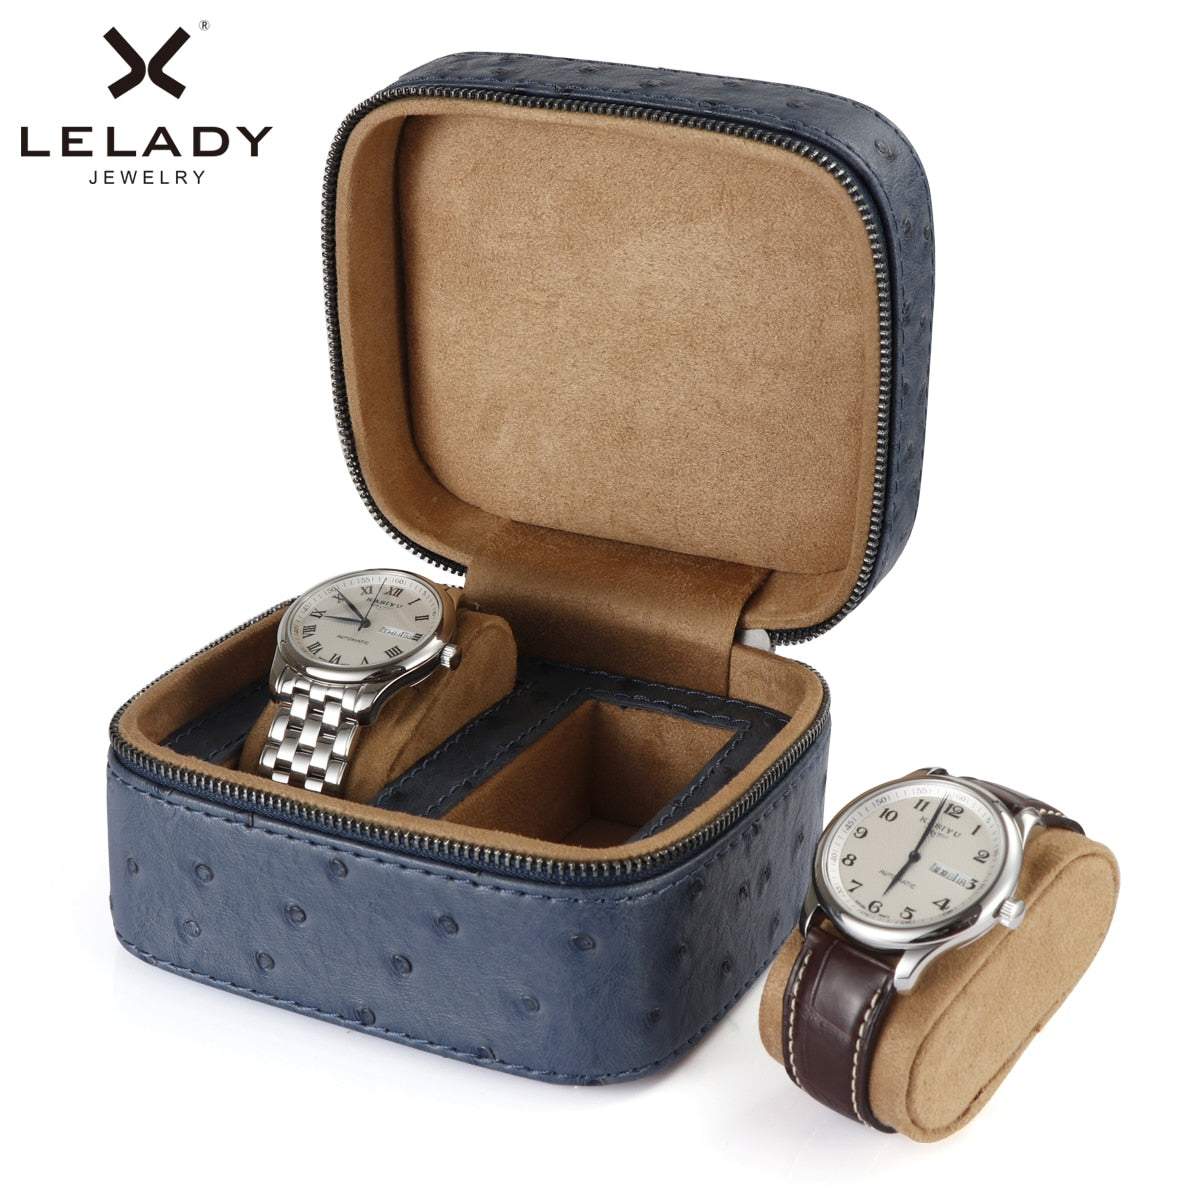 LELADY Luxury Watch Box 2 Grids High Quality PU Leather Watch Stand Case Bracelet Holder Boxes Stoagre Box for Clock Watches